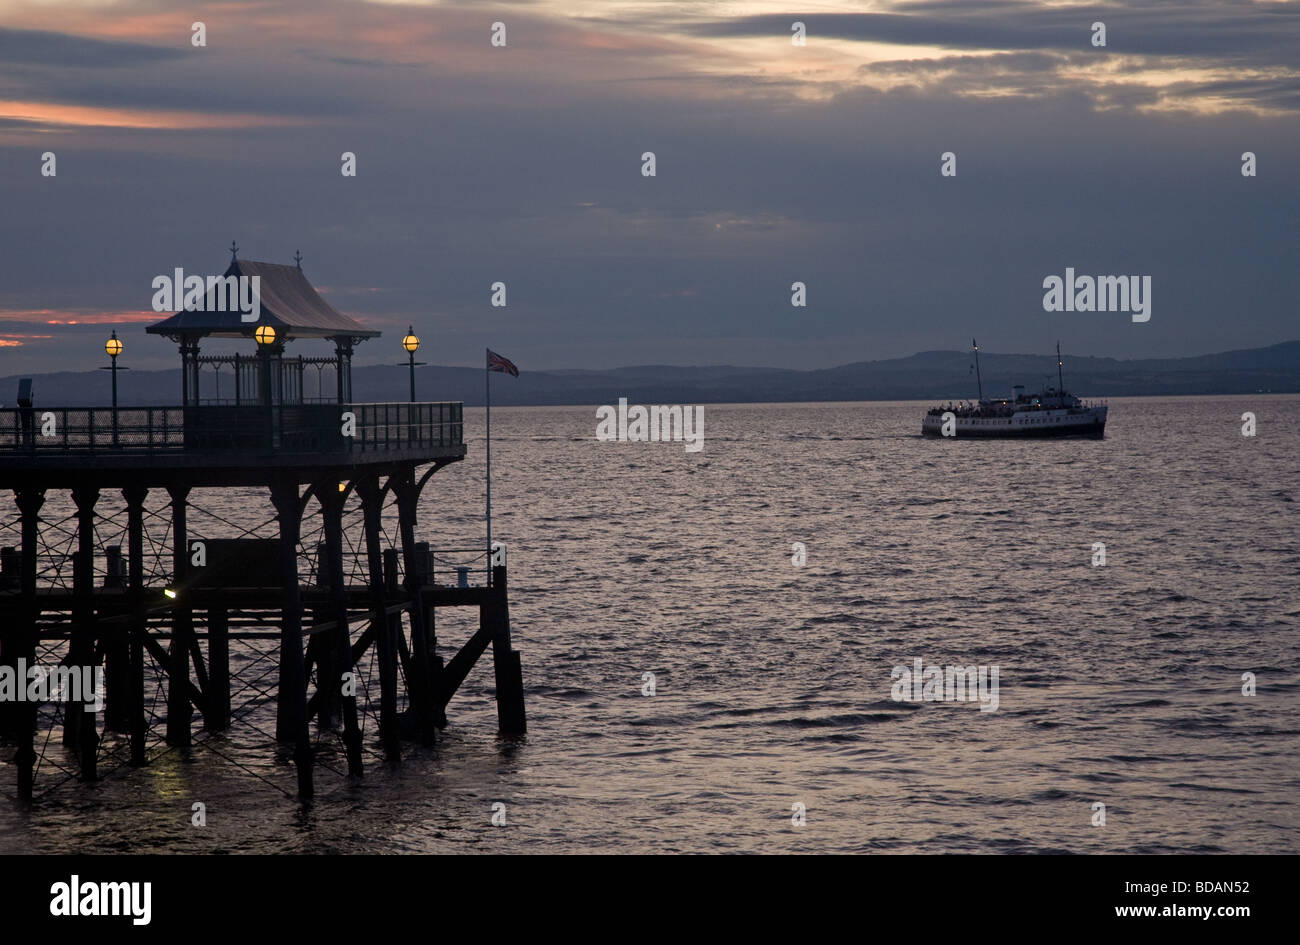 Clevedon Pier at sunset with the Balmoral steam ship preparing to dock, Clevedon, North Somerset, England, UK Stock Photo